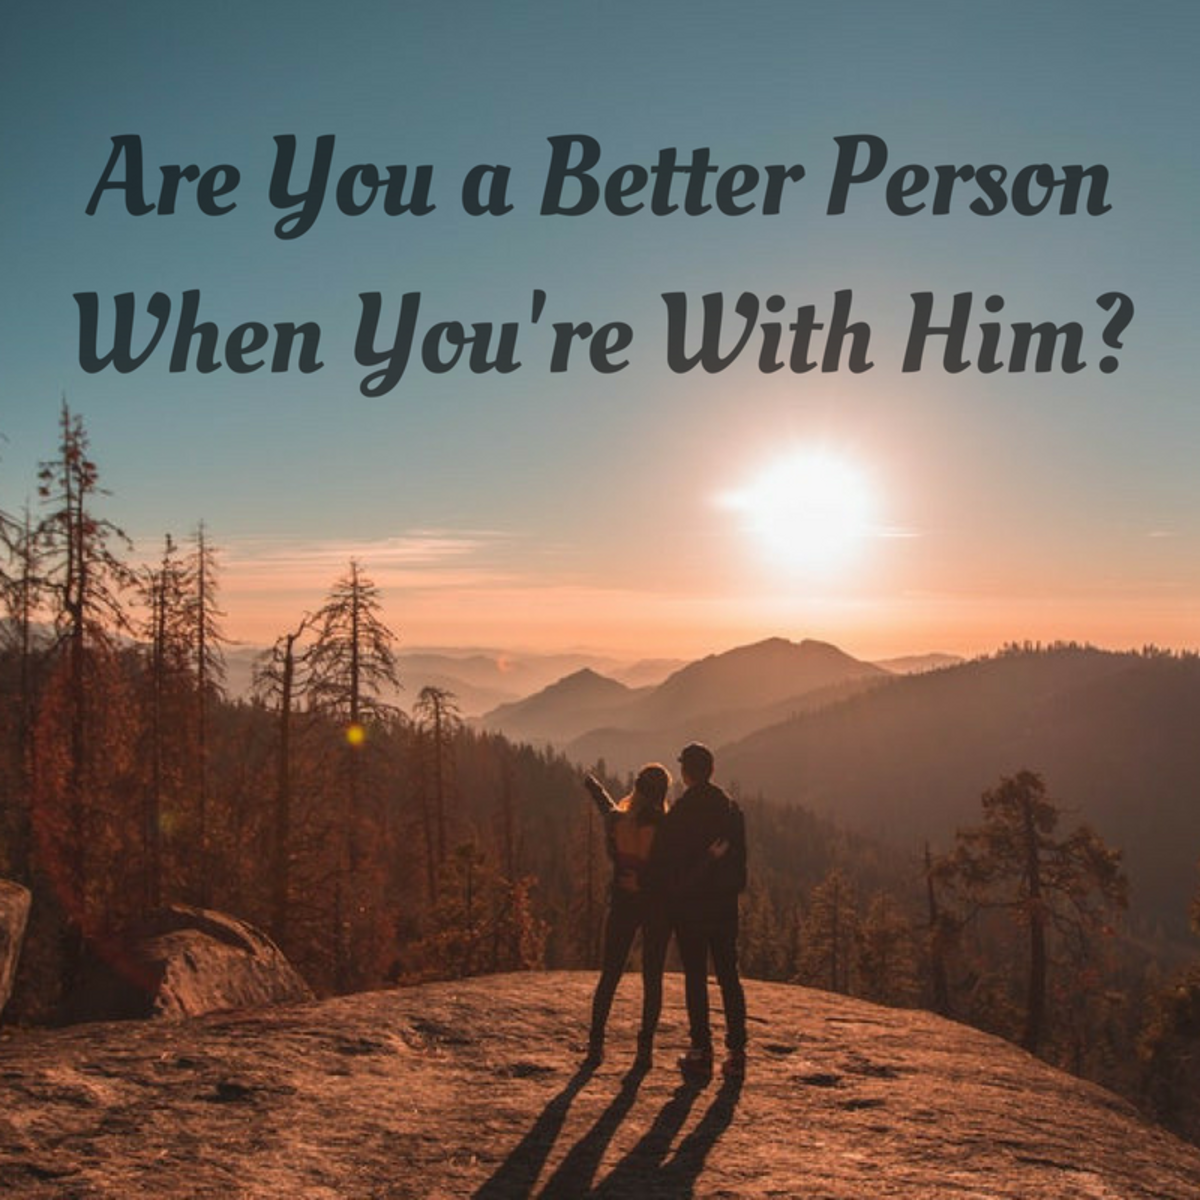 Learn how to recognize if your relationship is bringing out the best in you or not.